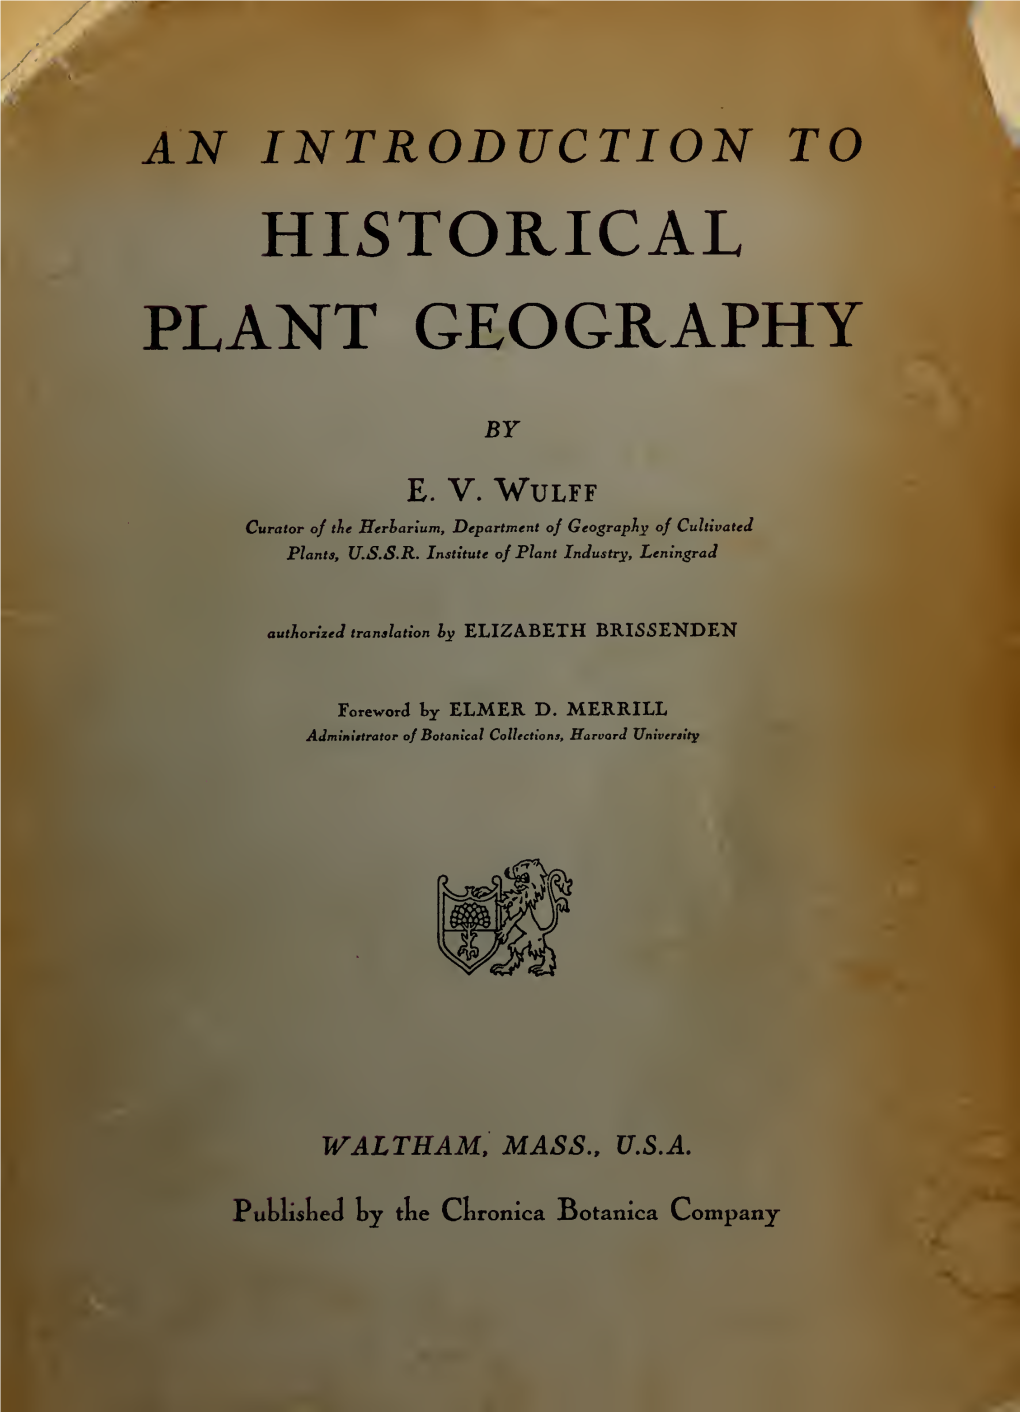 An Introduction to Historical Plant Geography